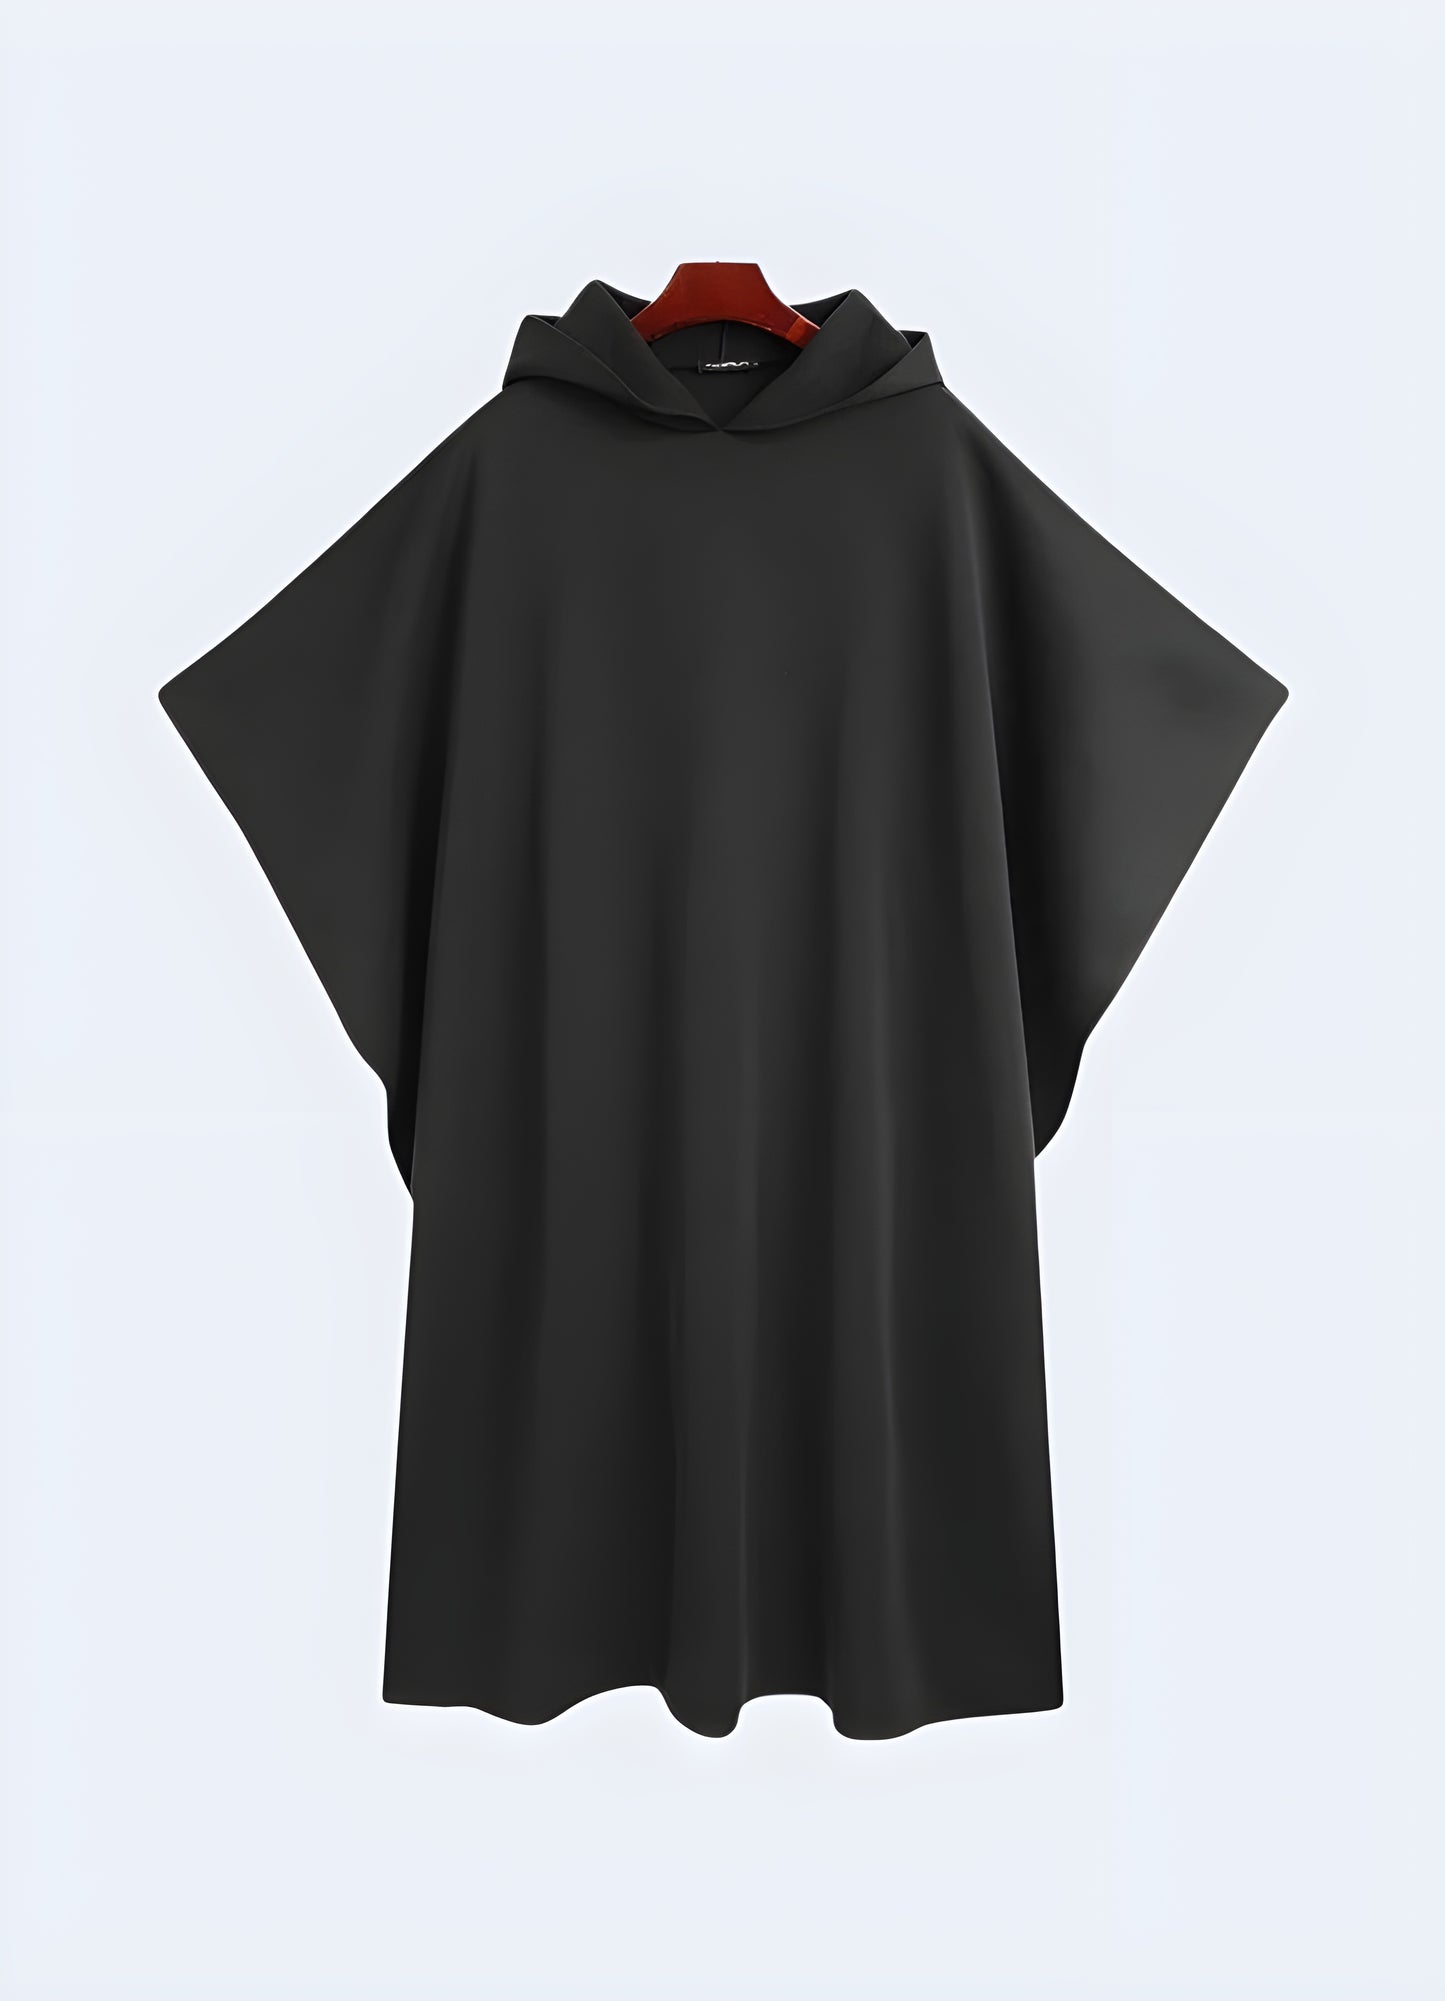 This techwear cape is a modern take on this classic garment.